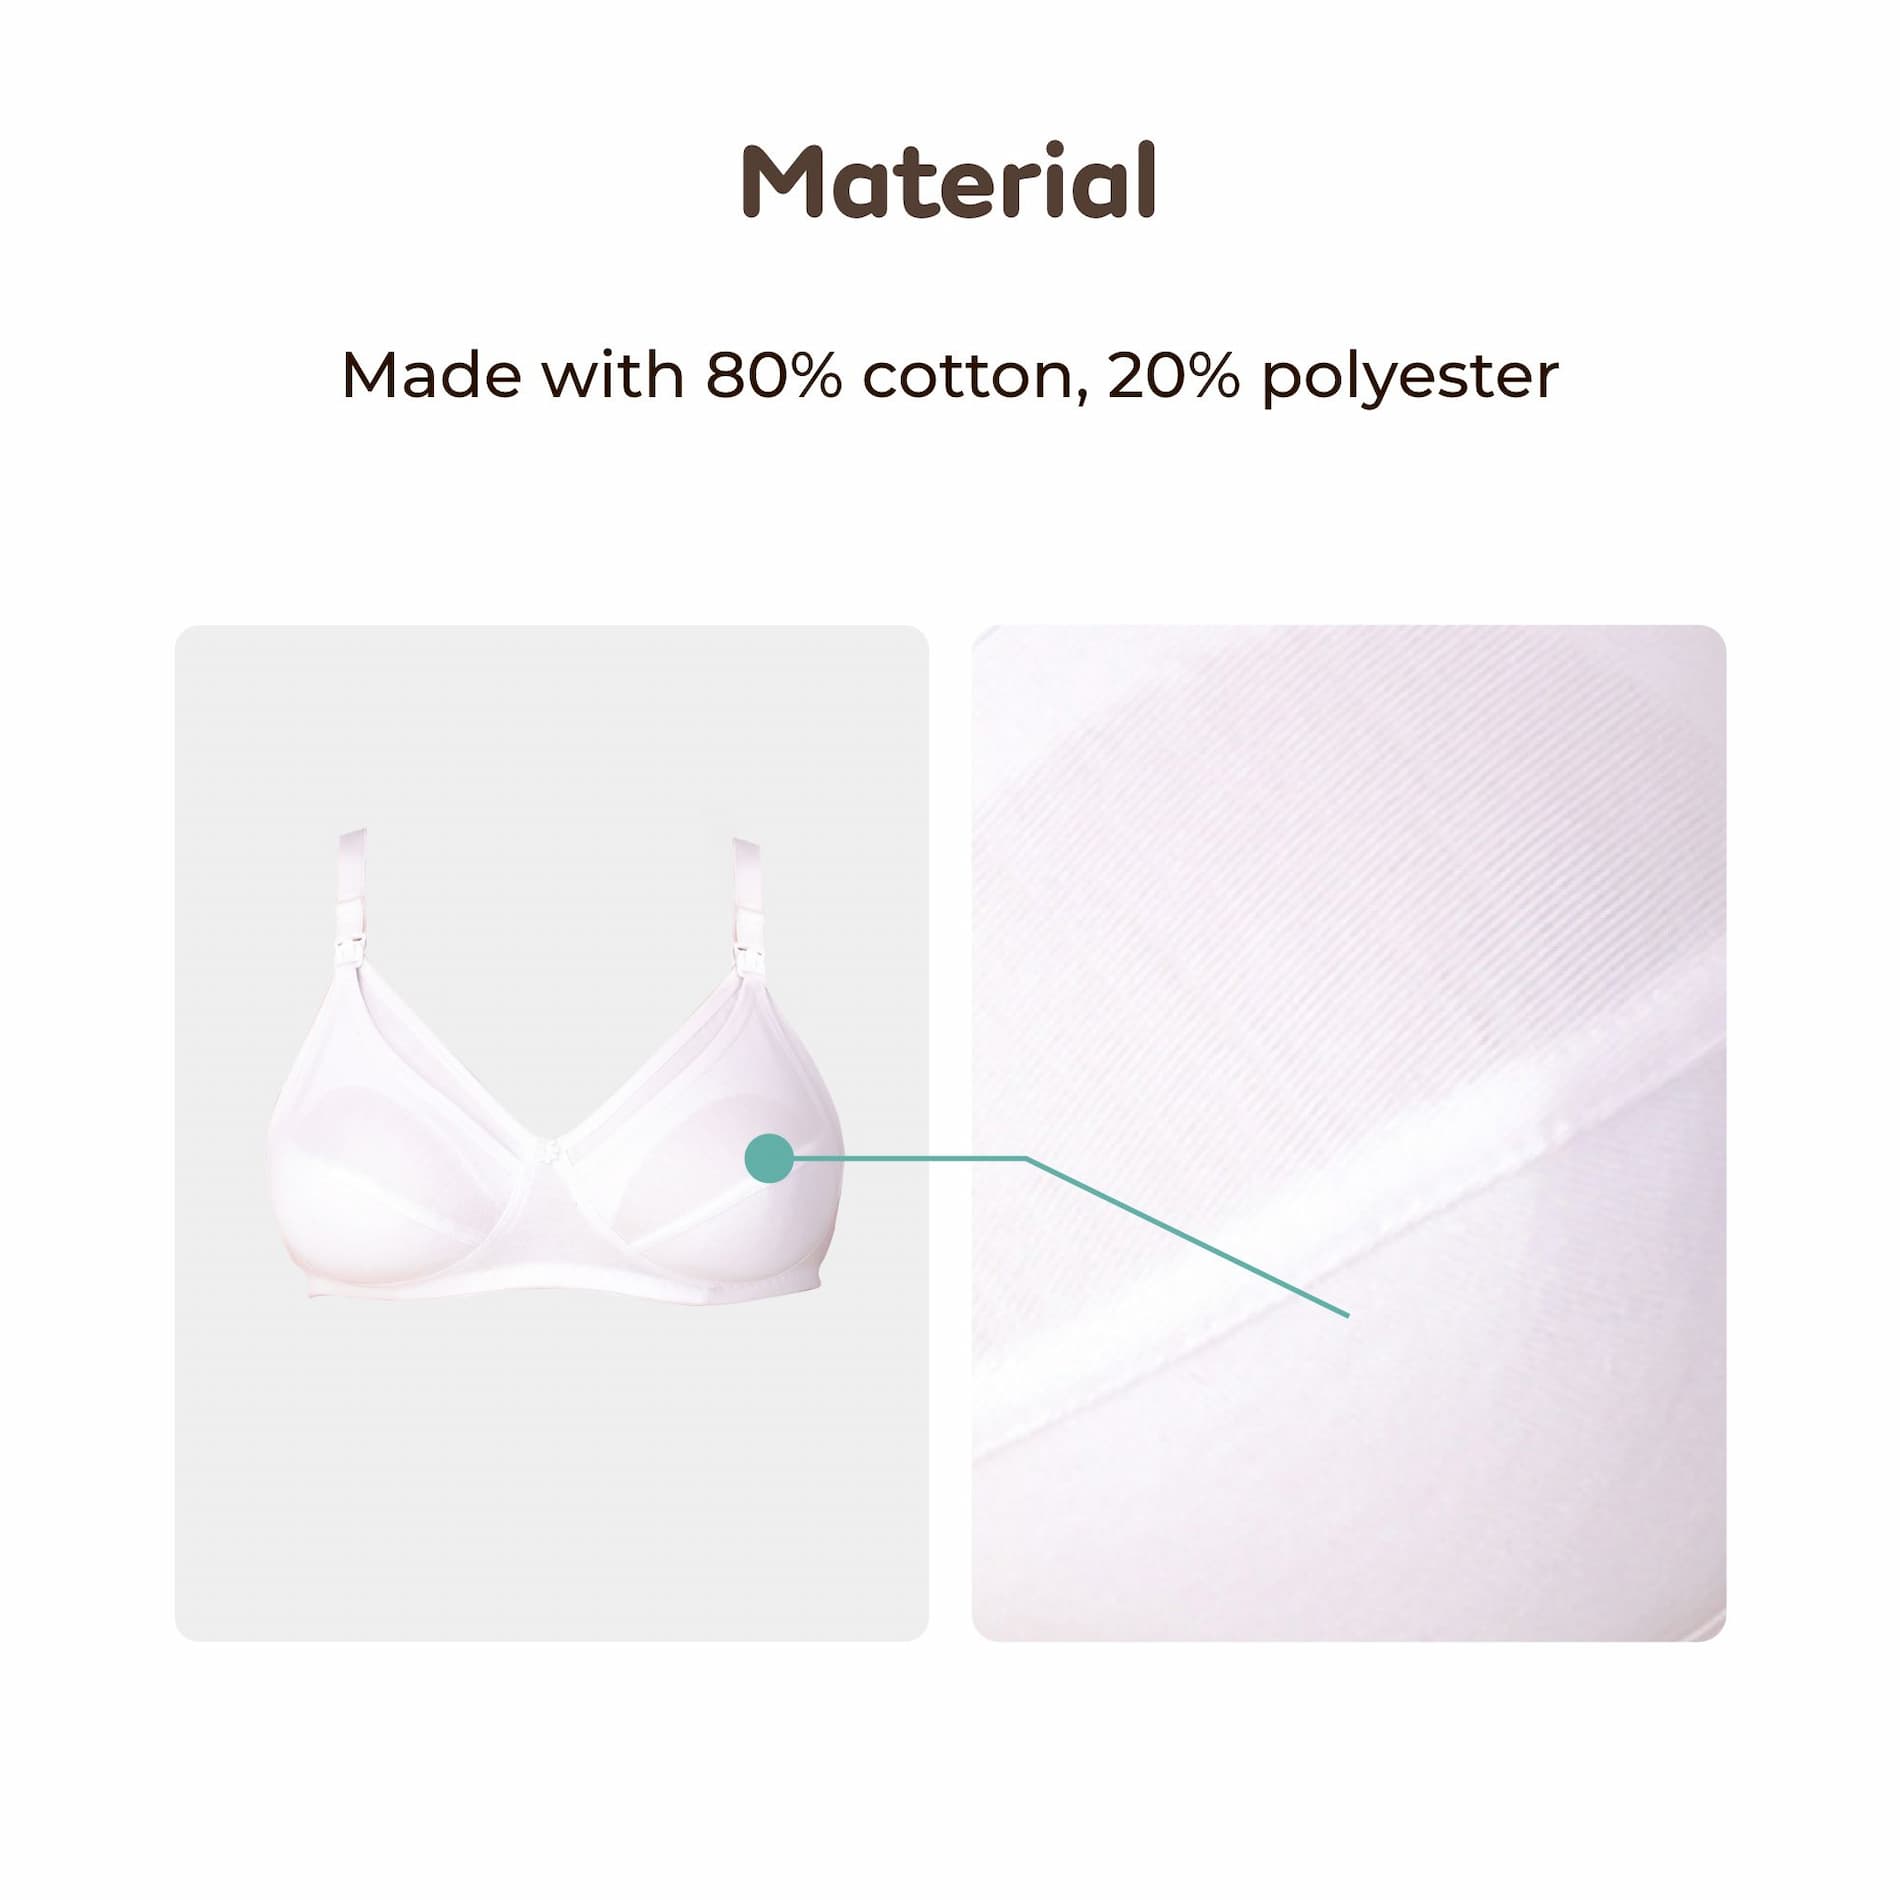 Mylo Maternity/Nursing Bras Non-Wired, Non-Padded with free Bra Extender – Classic White 30 B 